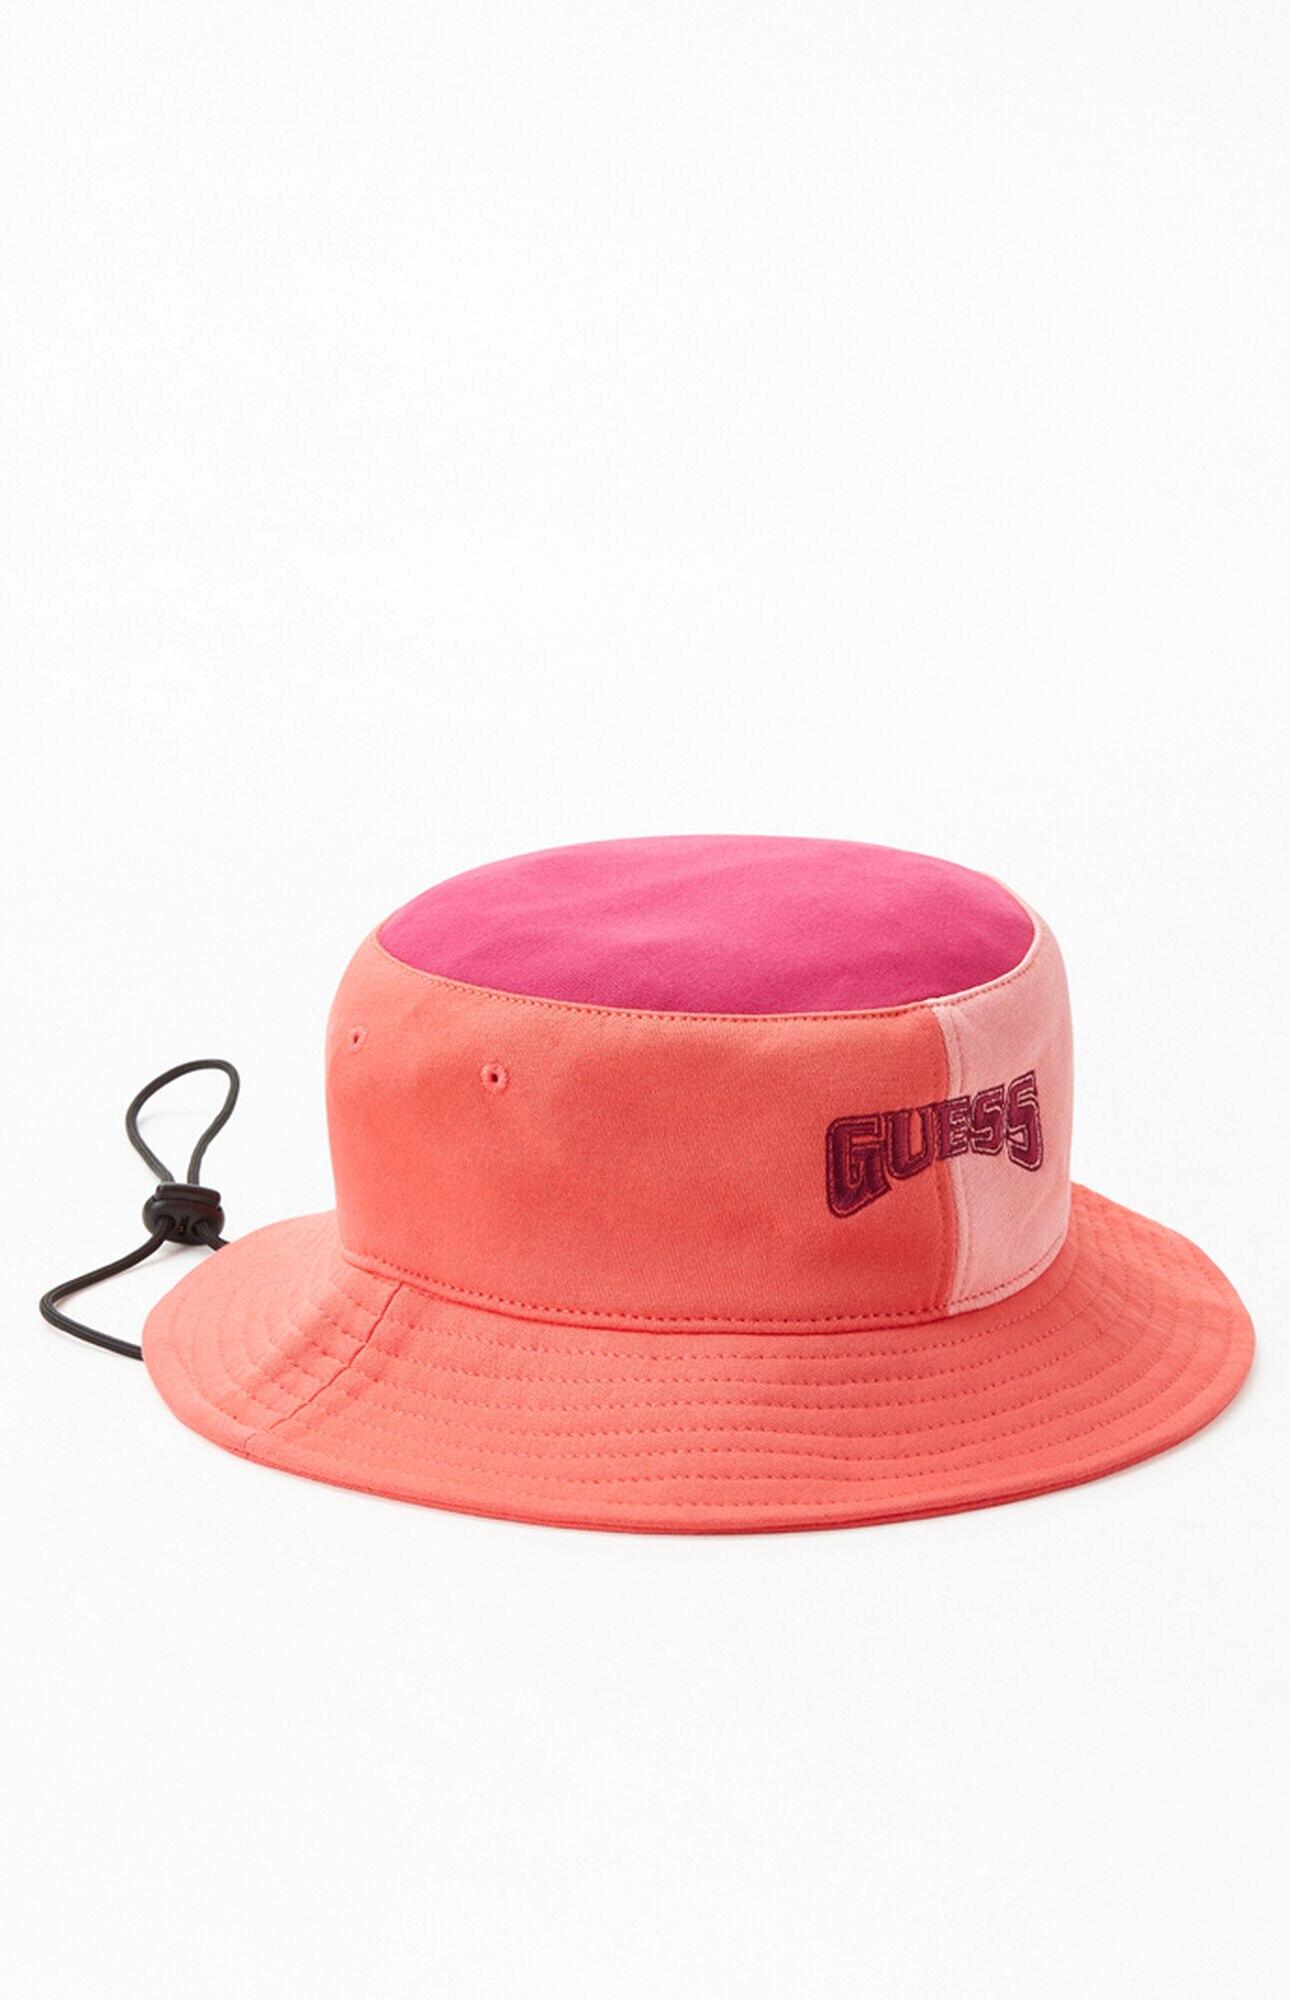 Guess X J Balvin Colorblocked Hat in Pink Men - Lyst